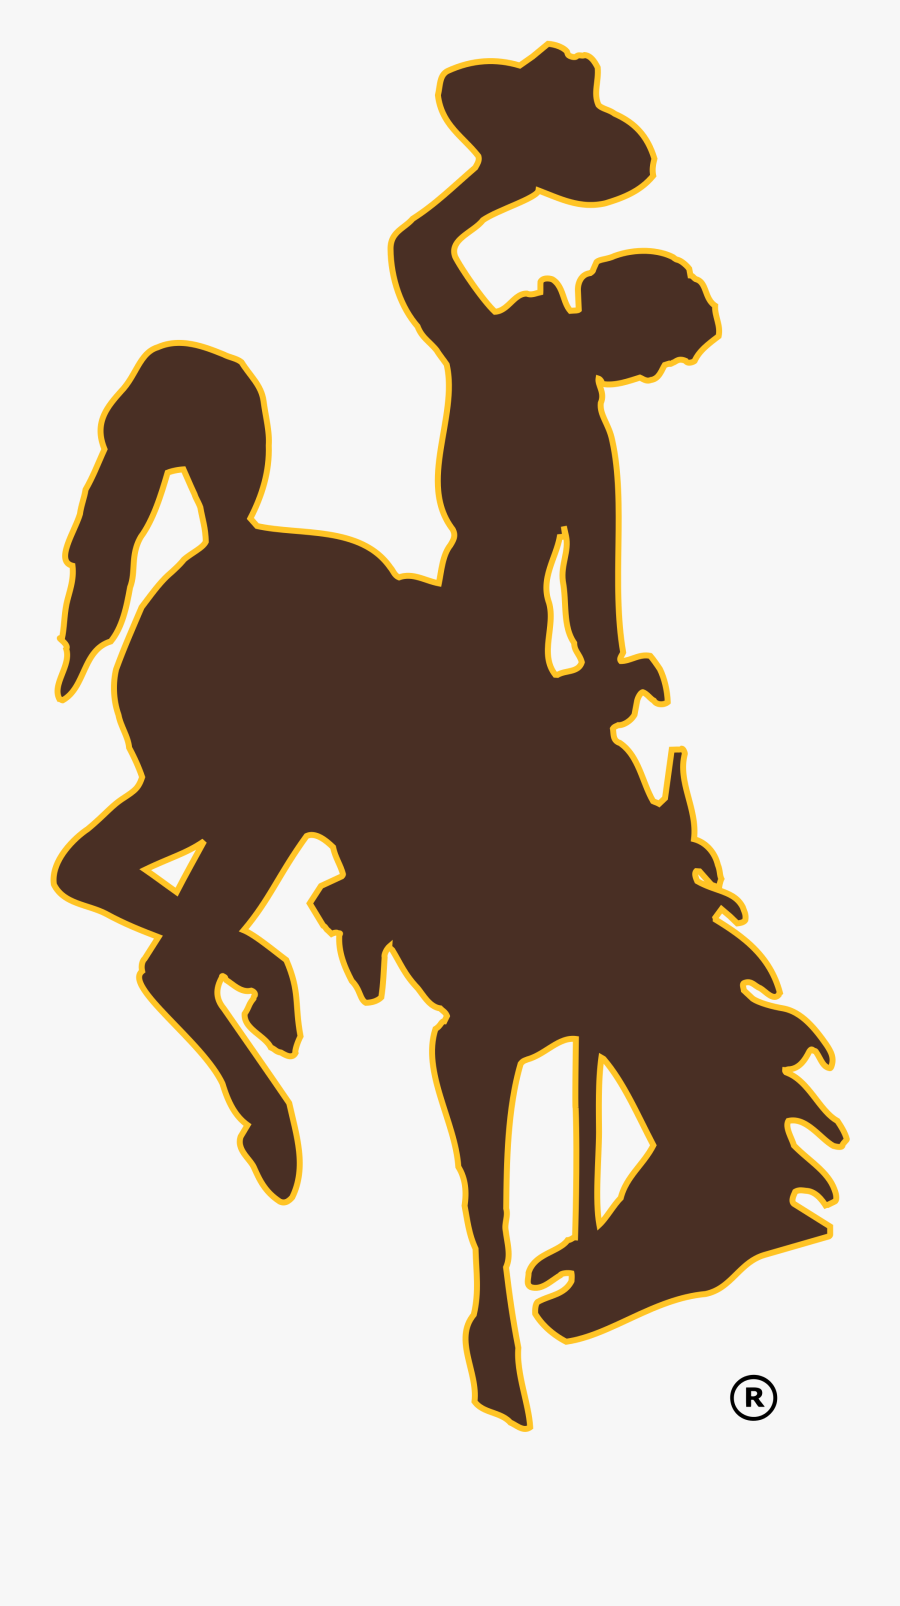 University Of Wyoming Logo Png, Transparent Clipart